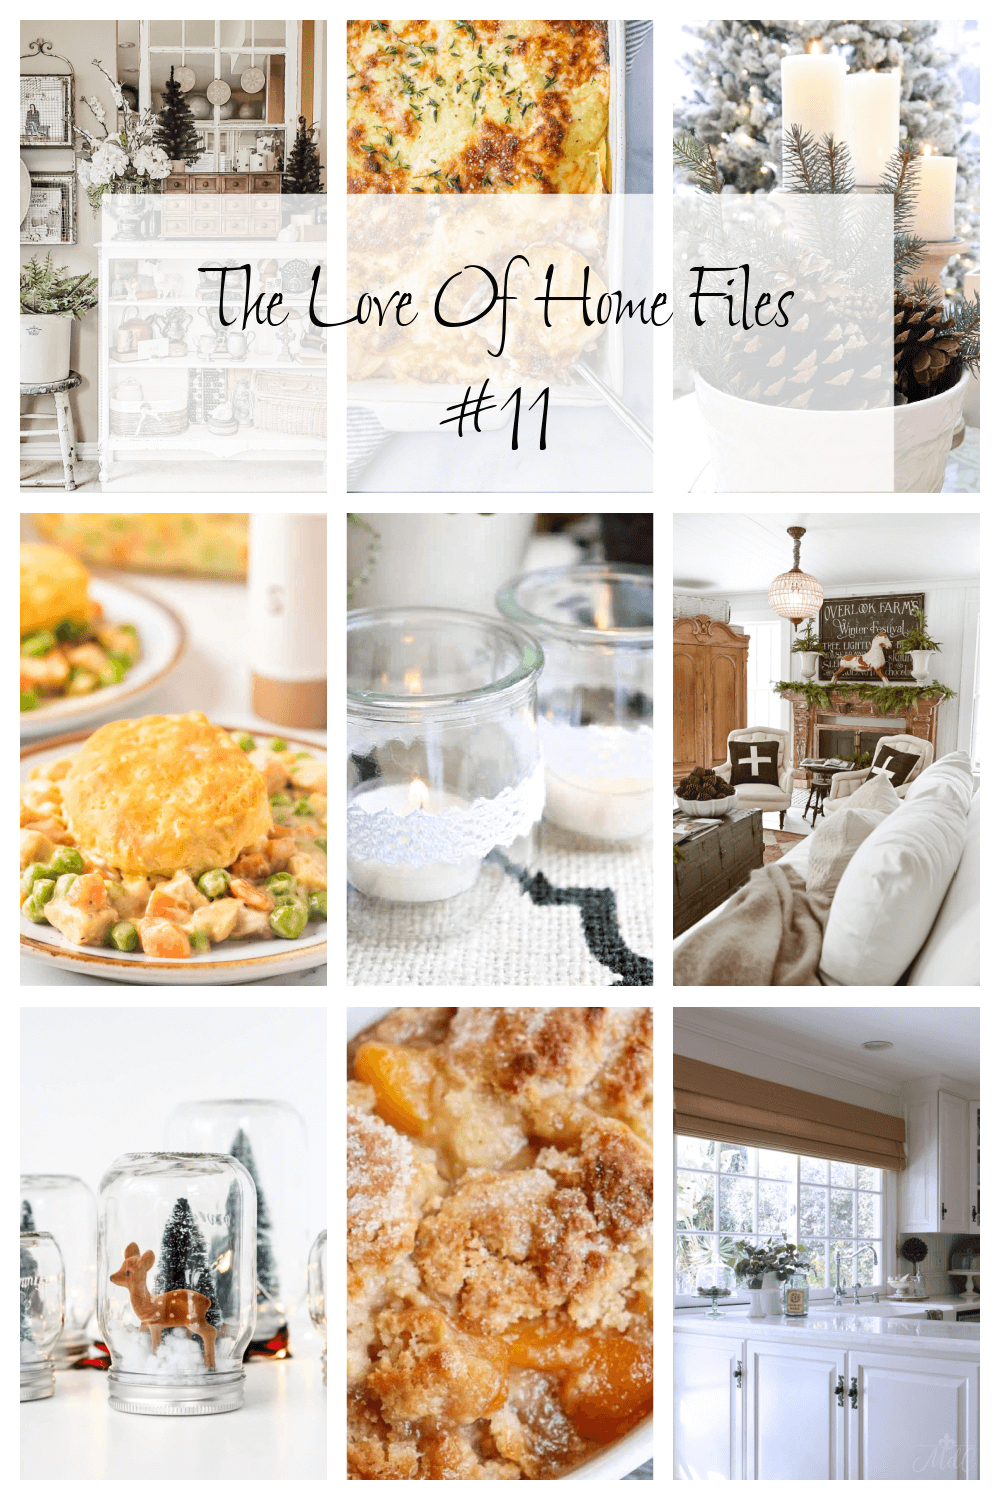 The Love Of Home Files #11